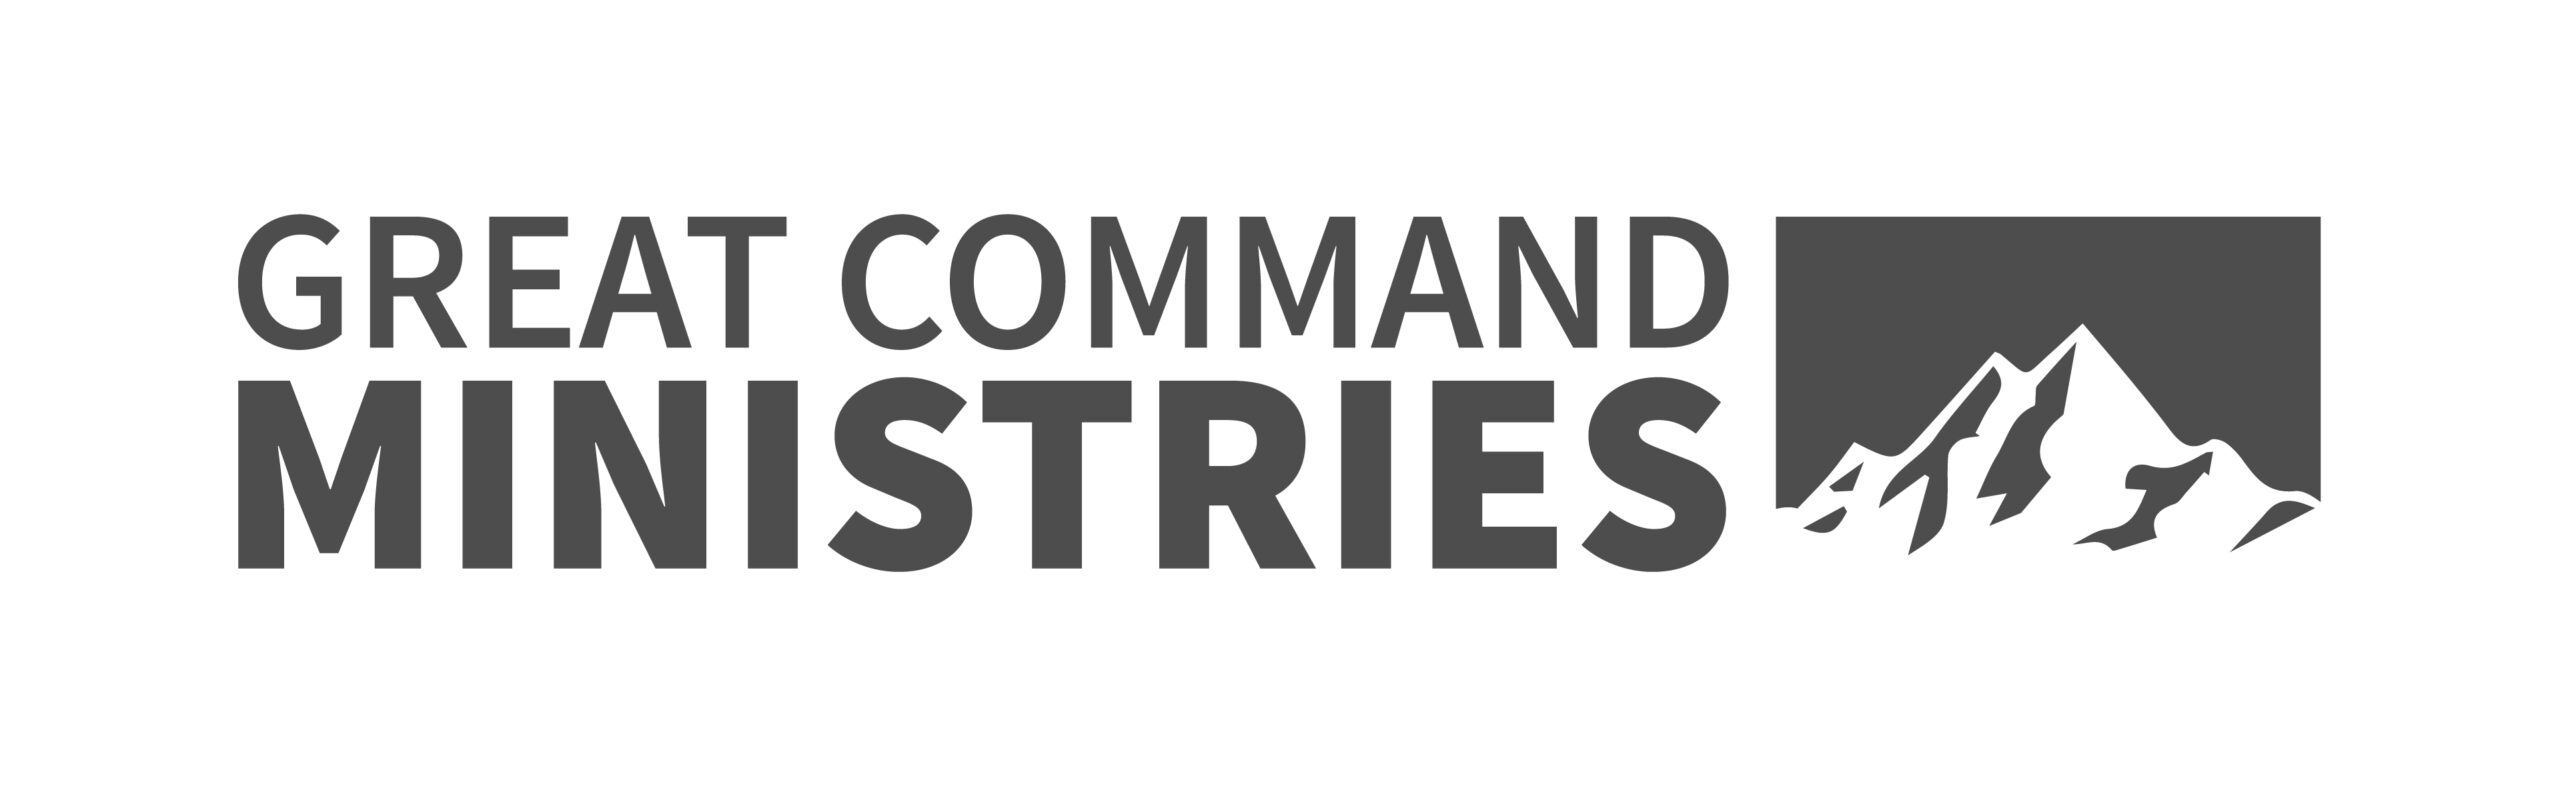 Great Command Ministries